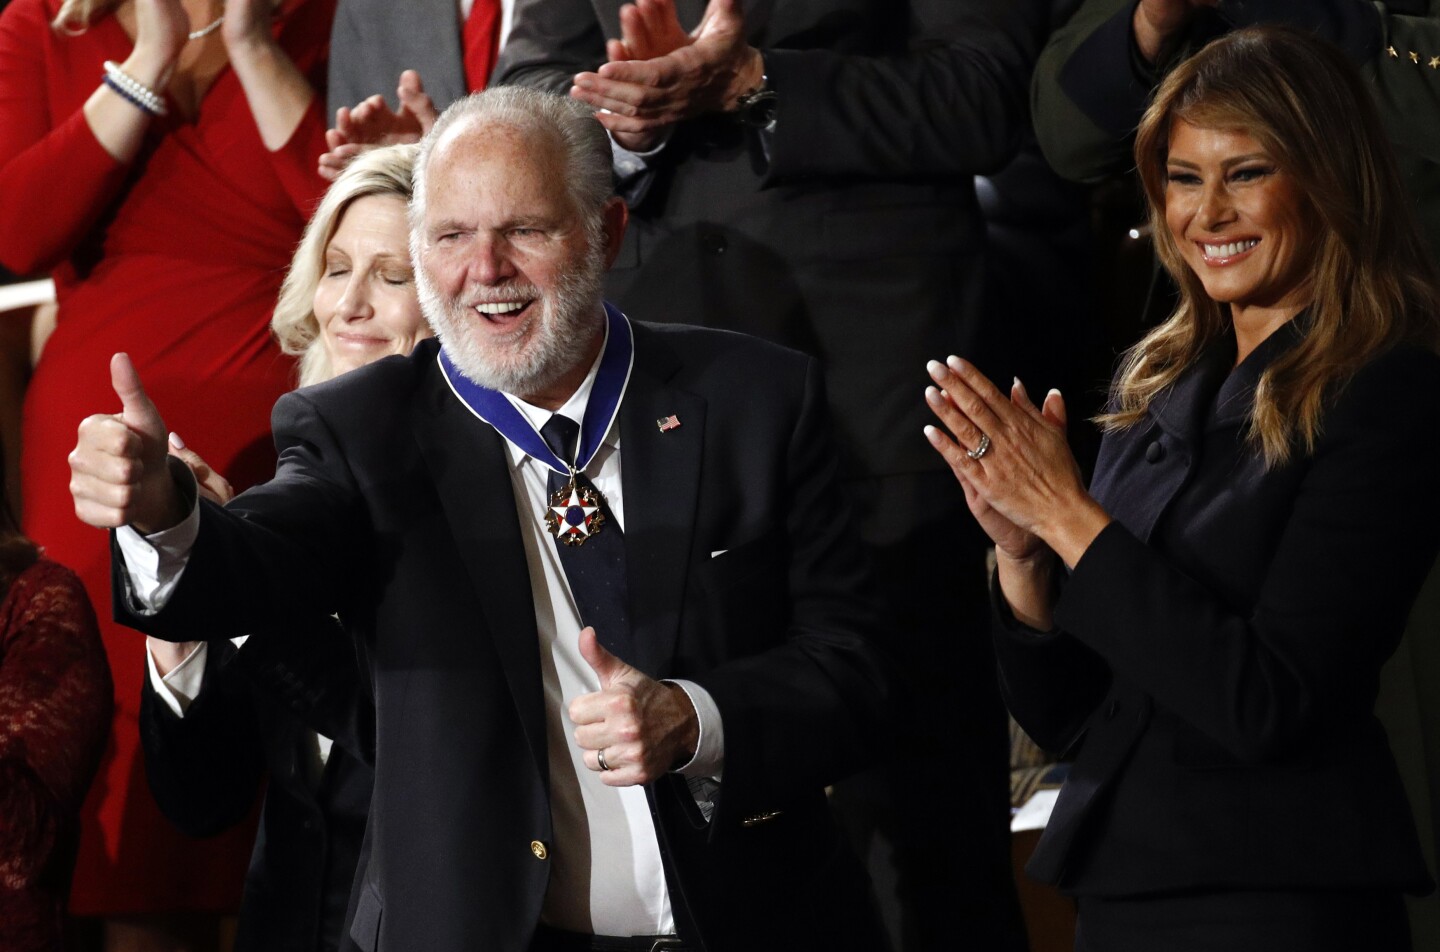 Rush Limbaugh reacts after first Lady Melania Trump presented him with the the Presidential Medal of Freedom as President Donald Trump delivers his State of the Union address to a joint session of Congress on Capitol Hill in Washington, Tuesday, Feb. 4, 2020. Second lady Karen Pence is at left and Kathryn Limbaugh is partially hidden. (AP Photo/Patrick Semansky)